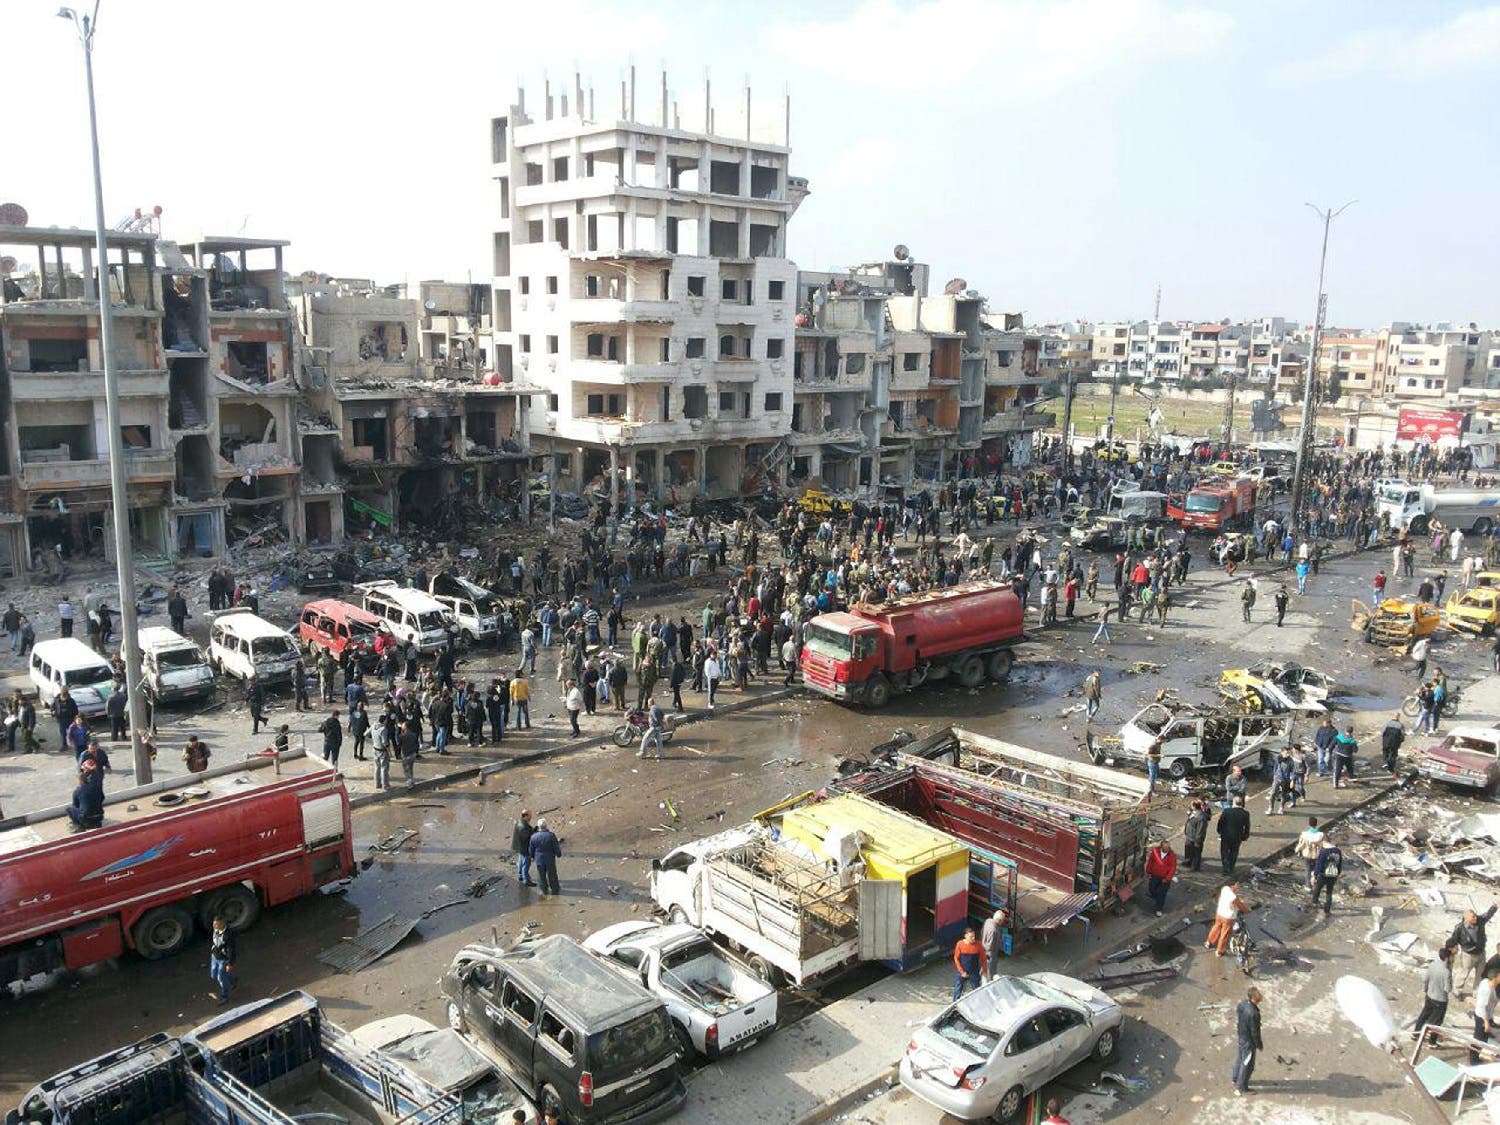 A general view shows the site of a two bomb blasts in the government-controlled city of Homs, Syria, in this handout picture provided by SANA on February 21, 2016. REUTERS